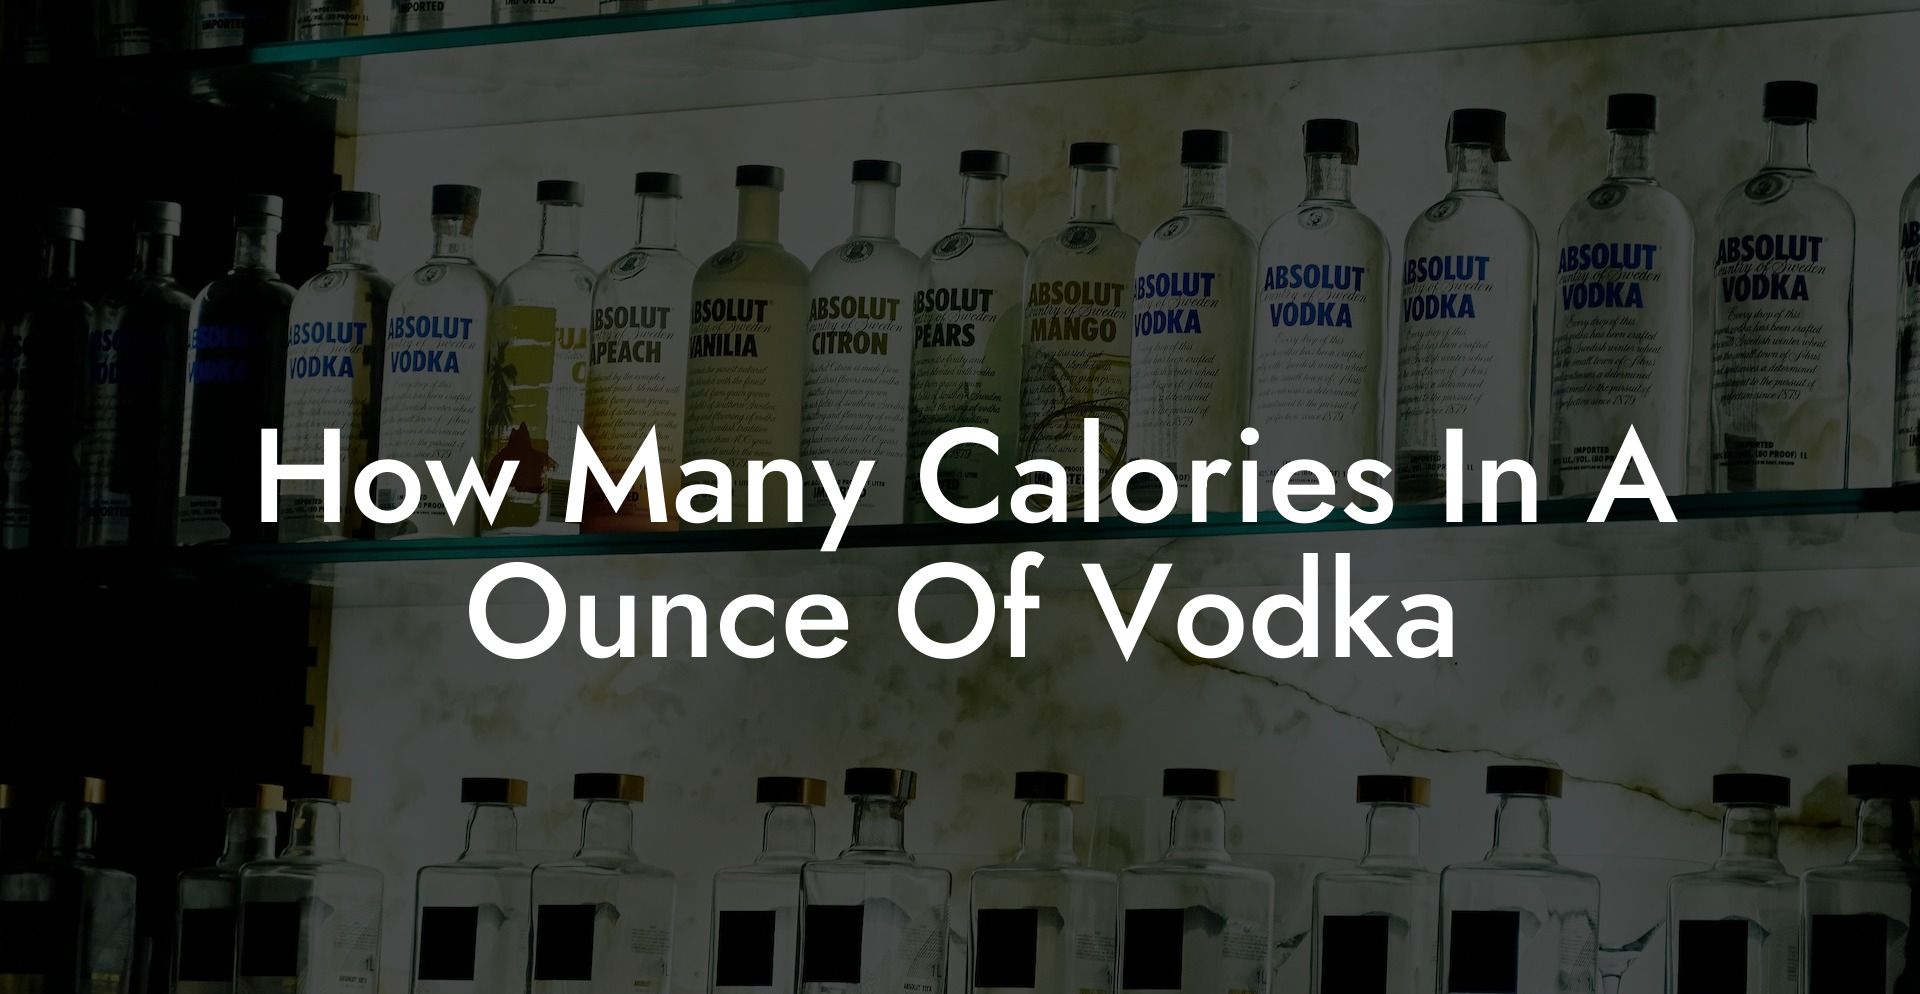 How Many Calories In A Ounce Of Vodka